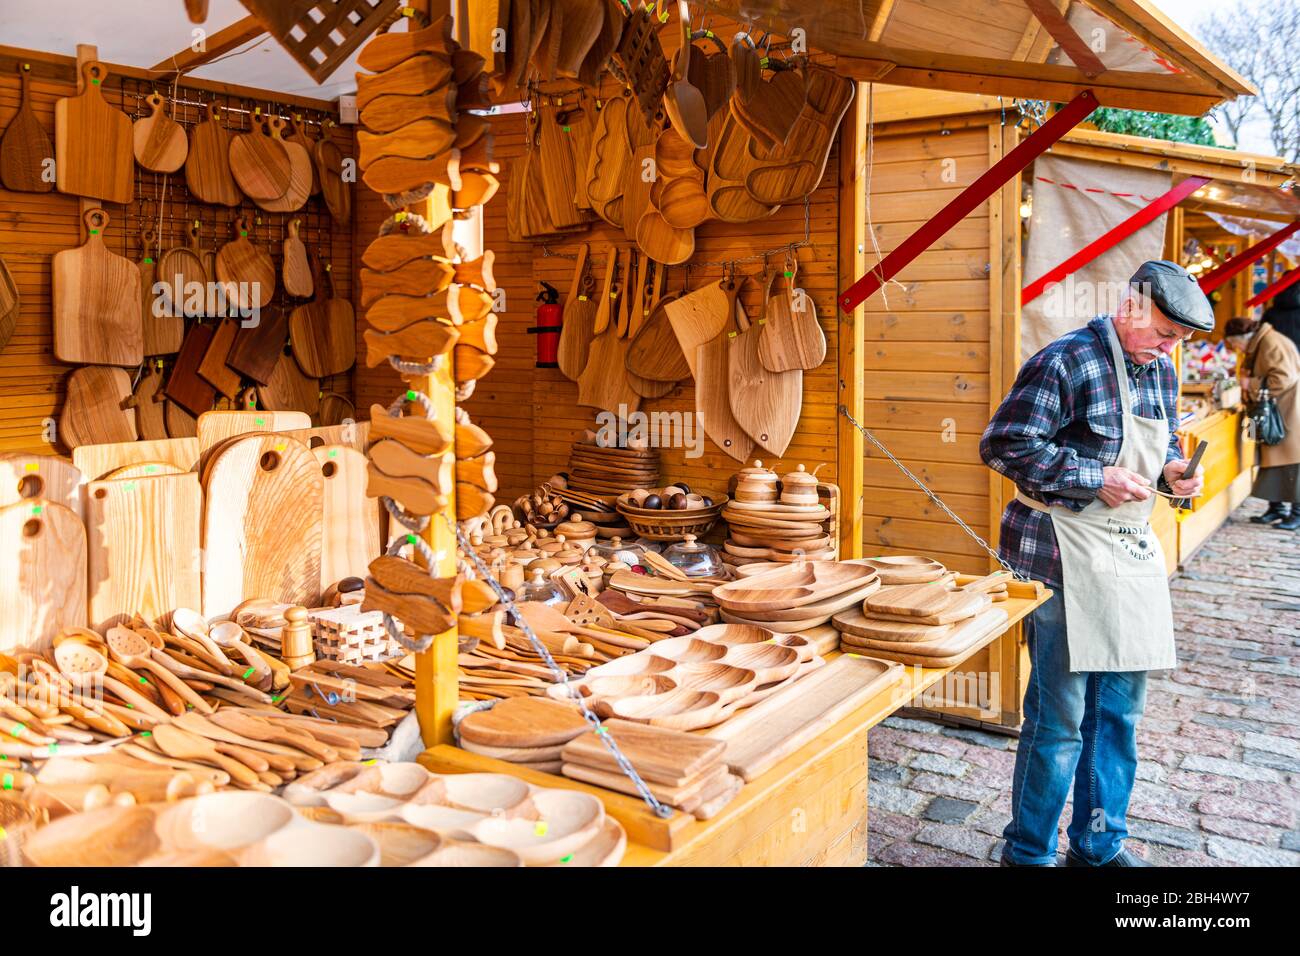 Warsaw, Poland - December 21, 2019: Christmas market stall in Warszawa old town with people senior man seller vendor in winter selling wood art Stock Photo